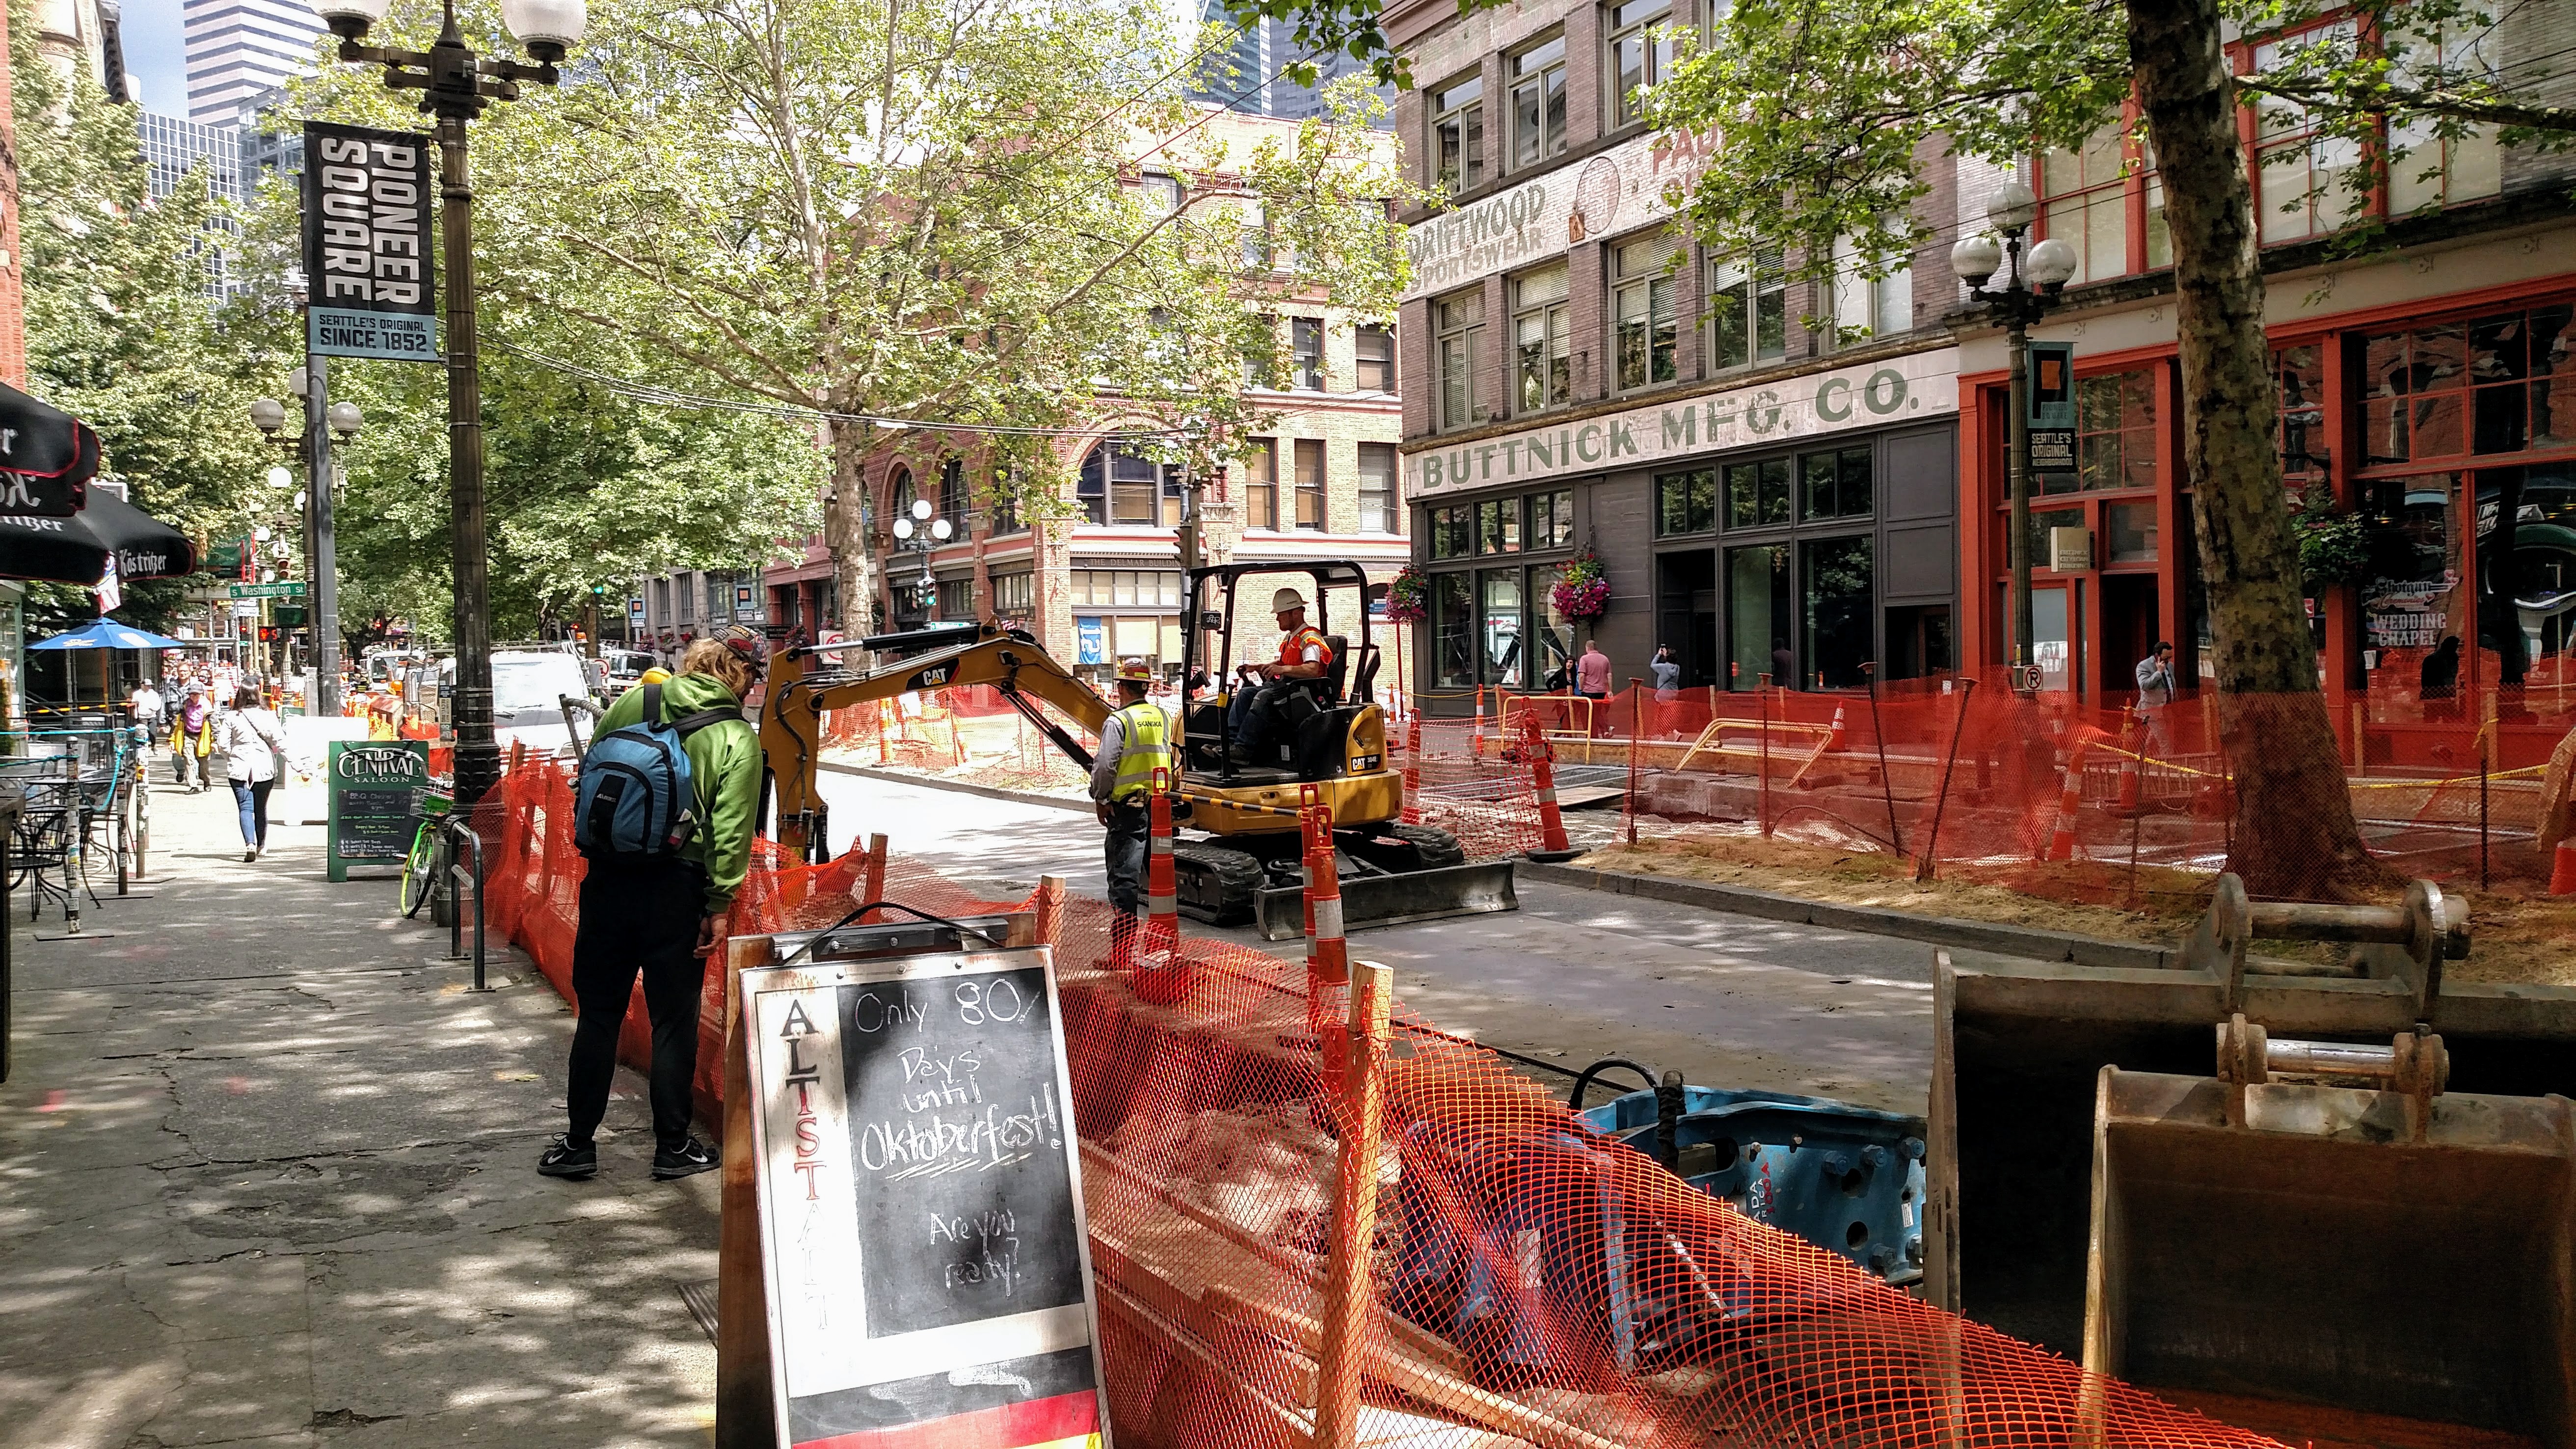 First Avenue utility work continues in Pioneer Square. (Photo by author)